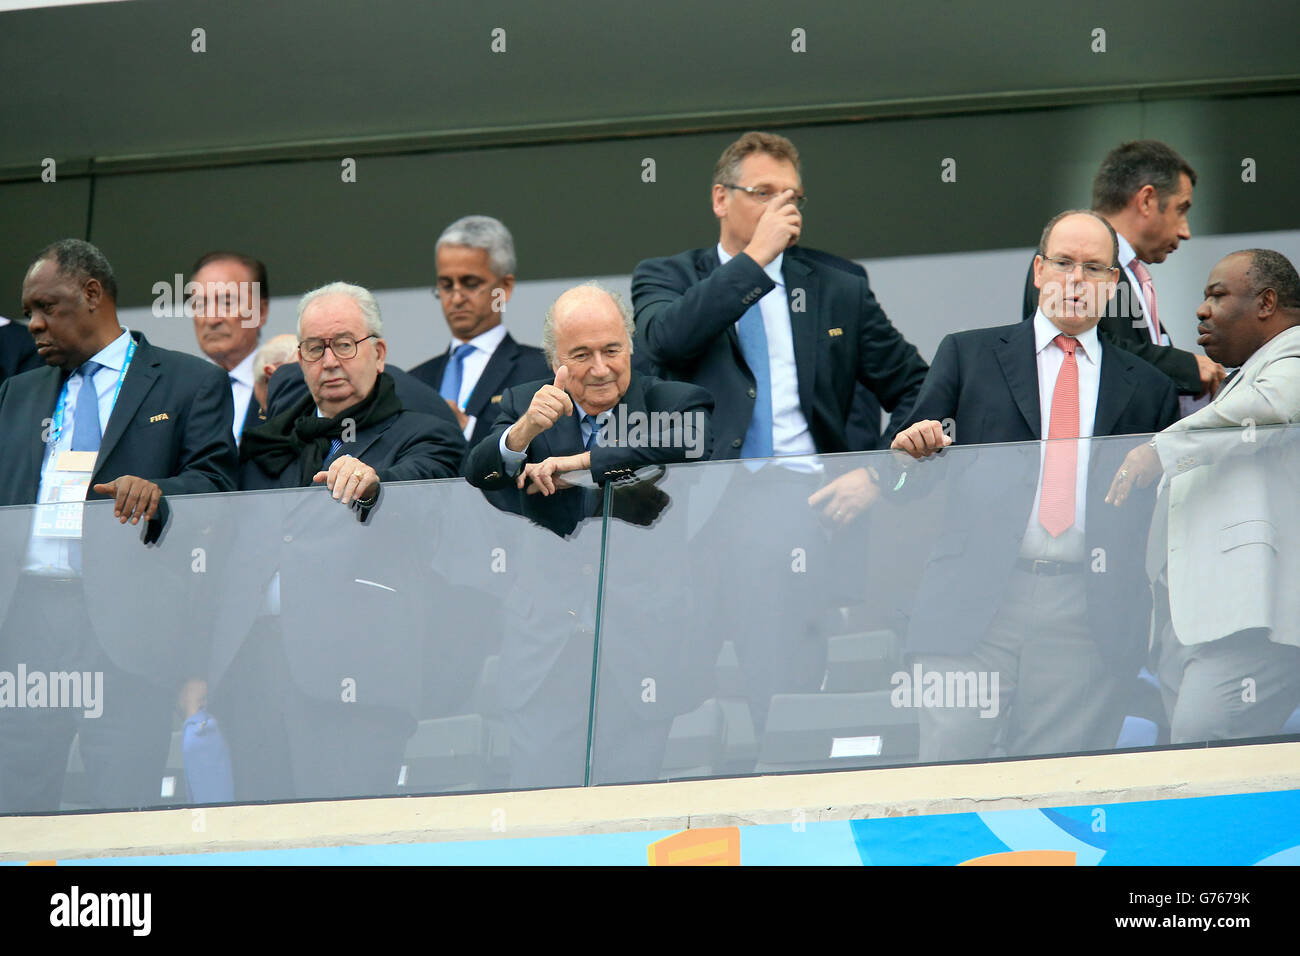 FIFA president Sepp Blatter (centre) in the stands before the FIFA World Cup Semi Final at the Arena de Sao Paulo, Sao Paulo, Brazil. Stock Photo